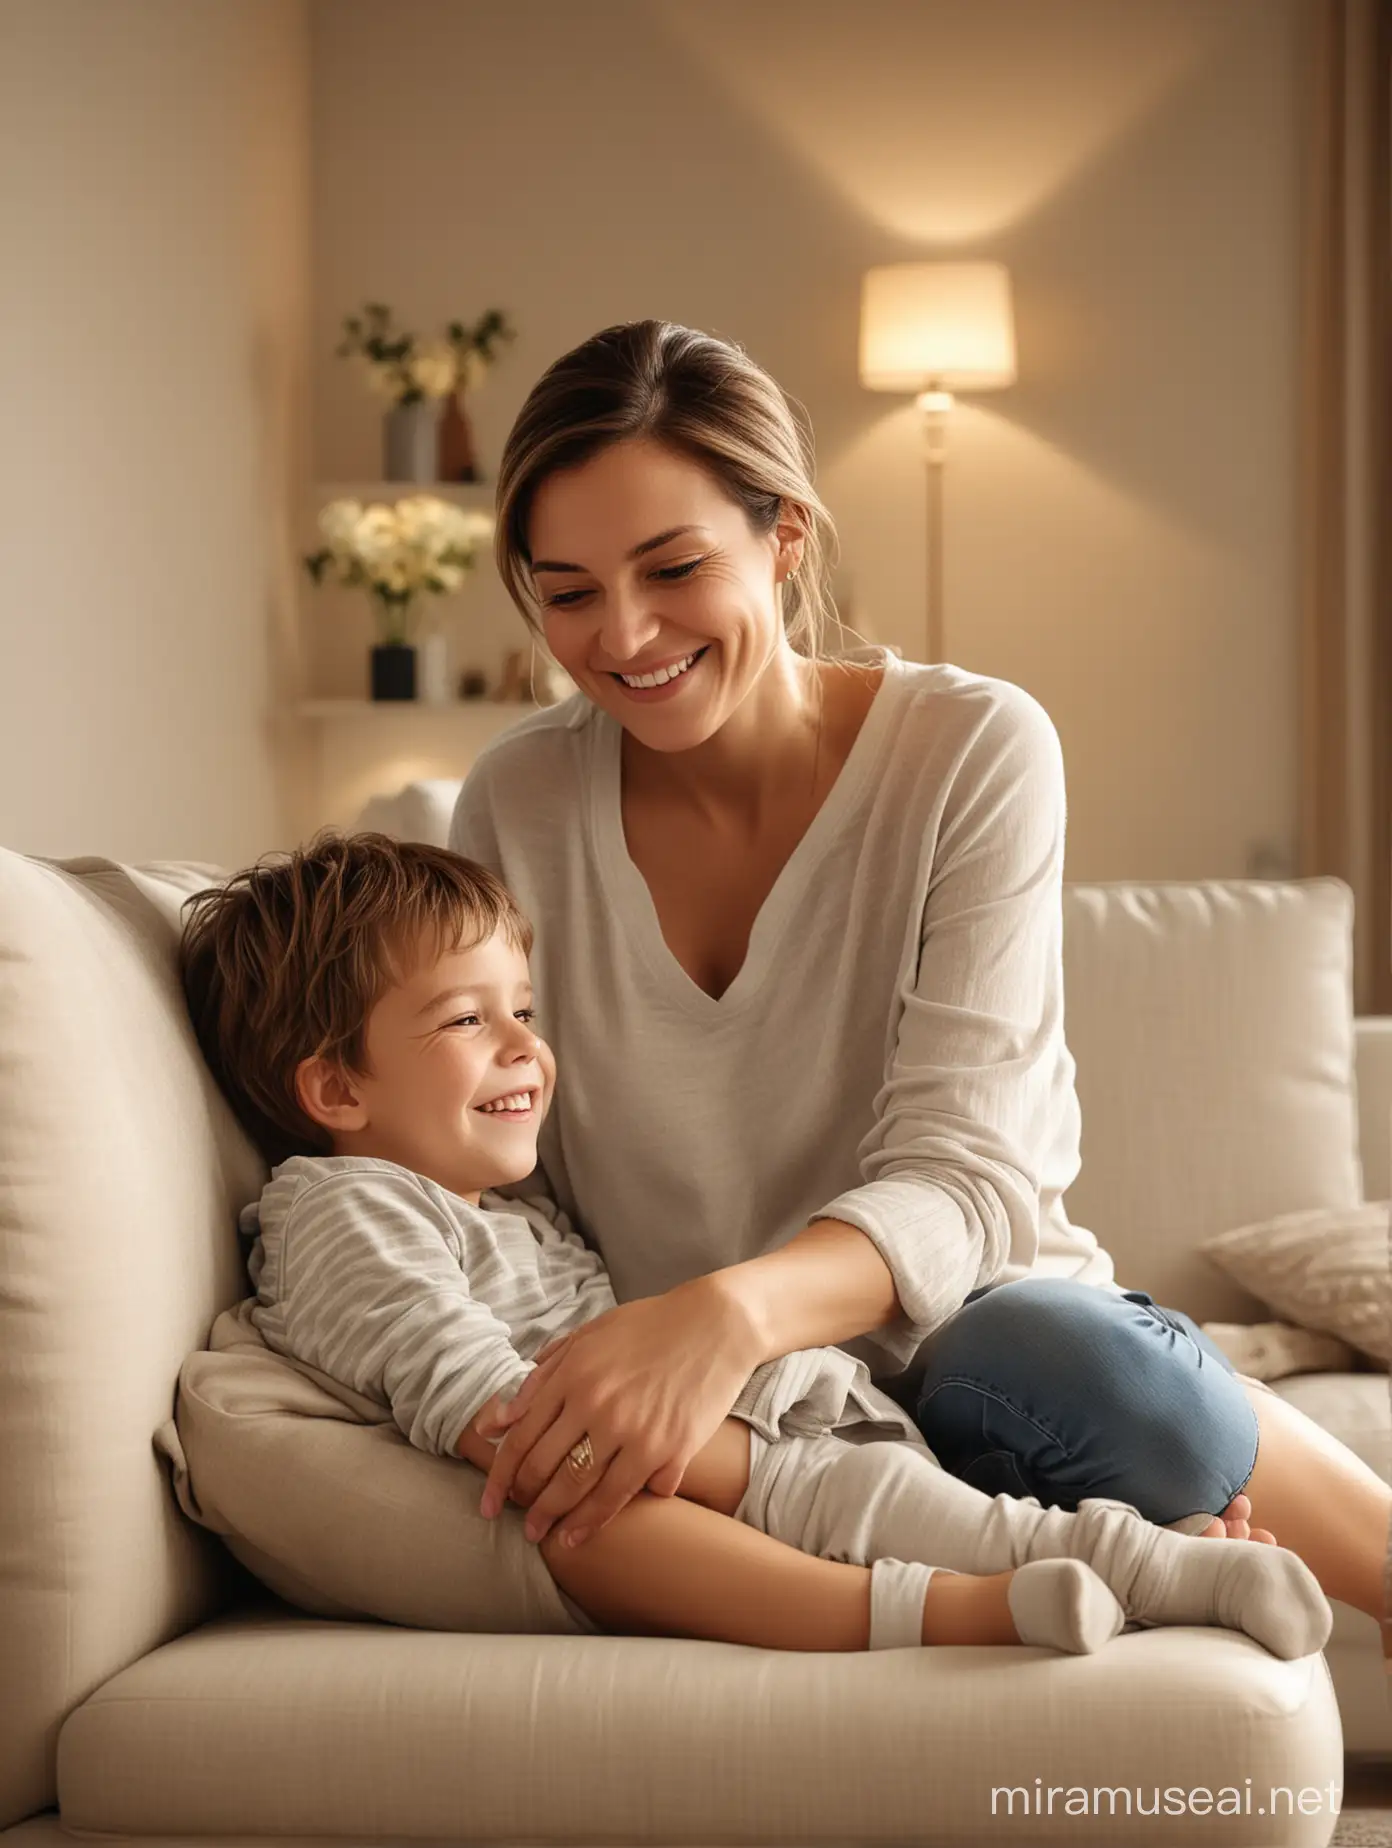 Smiling Mother and Son Embracing in Bright Clean Home Environment